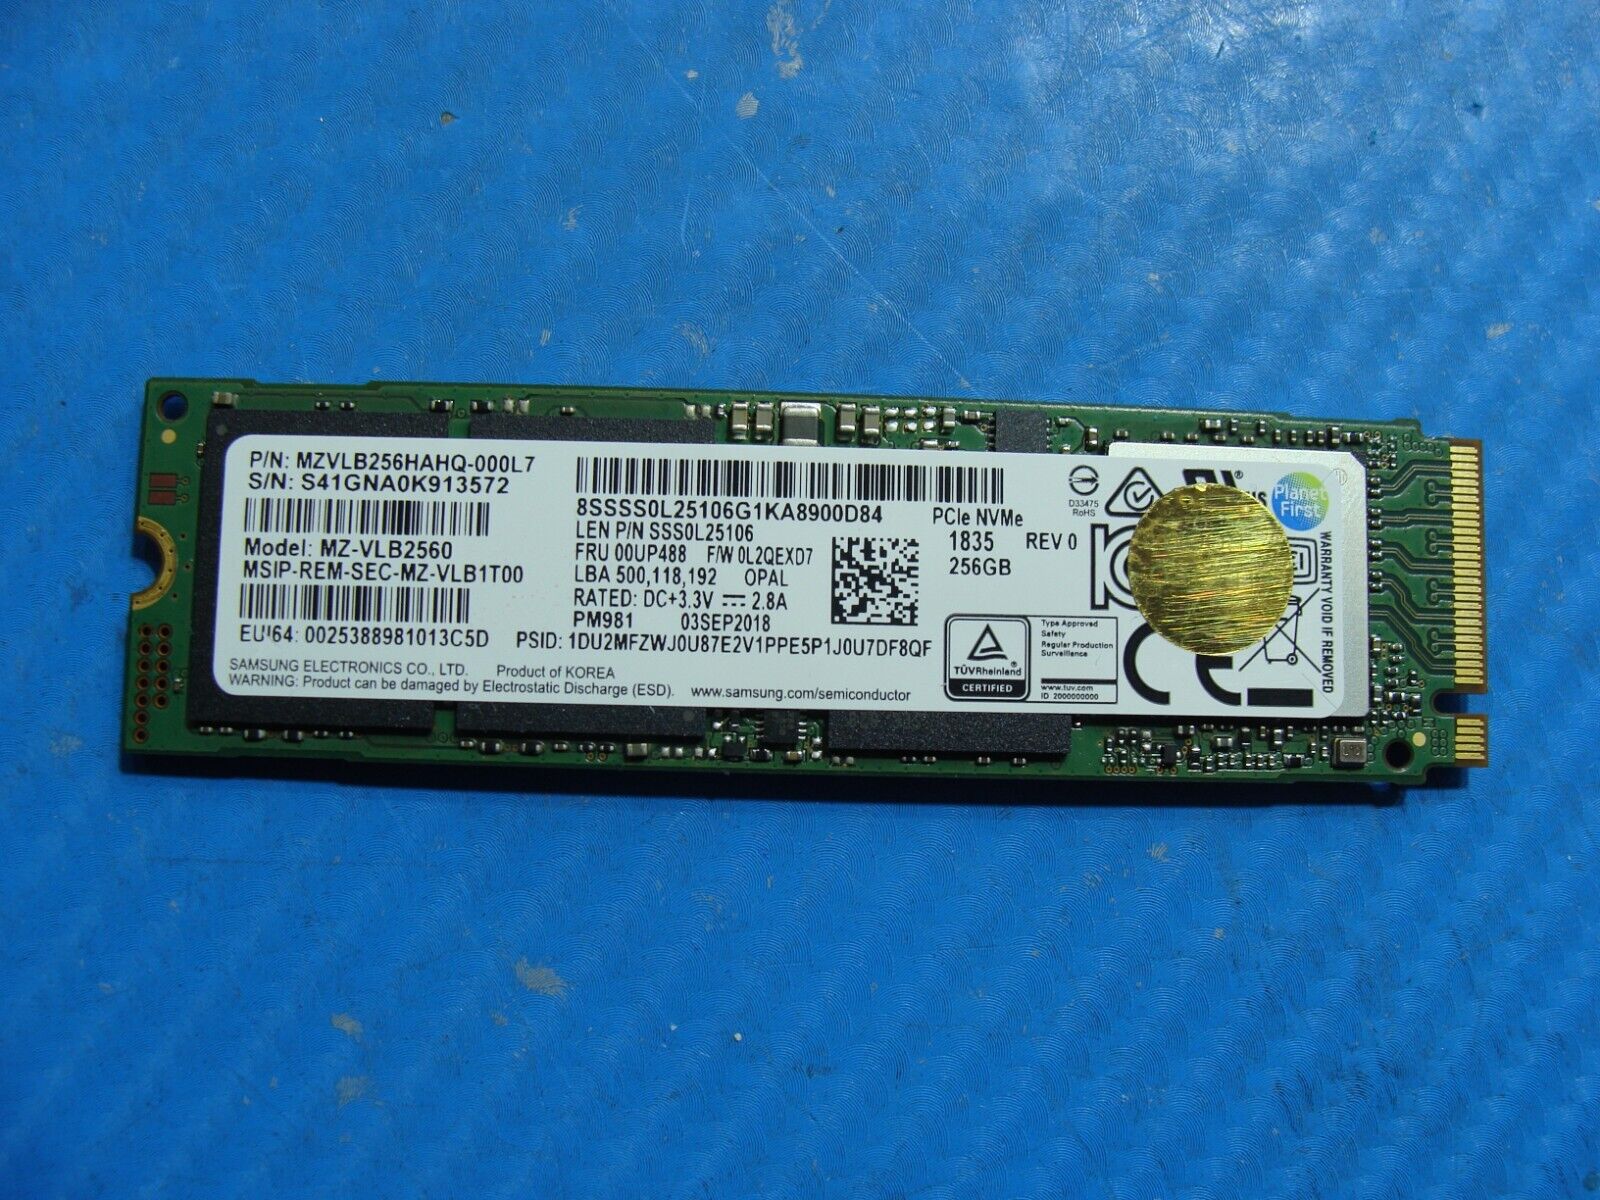 Lenovo T480s Samsung 256GB NVMe M.2 SSD Solid State Drive MZVLB256HAHQ-000L7